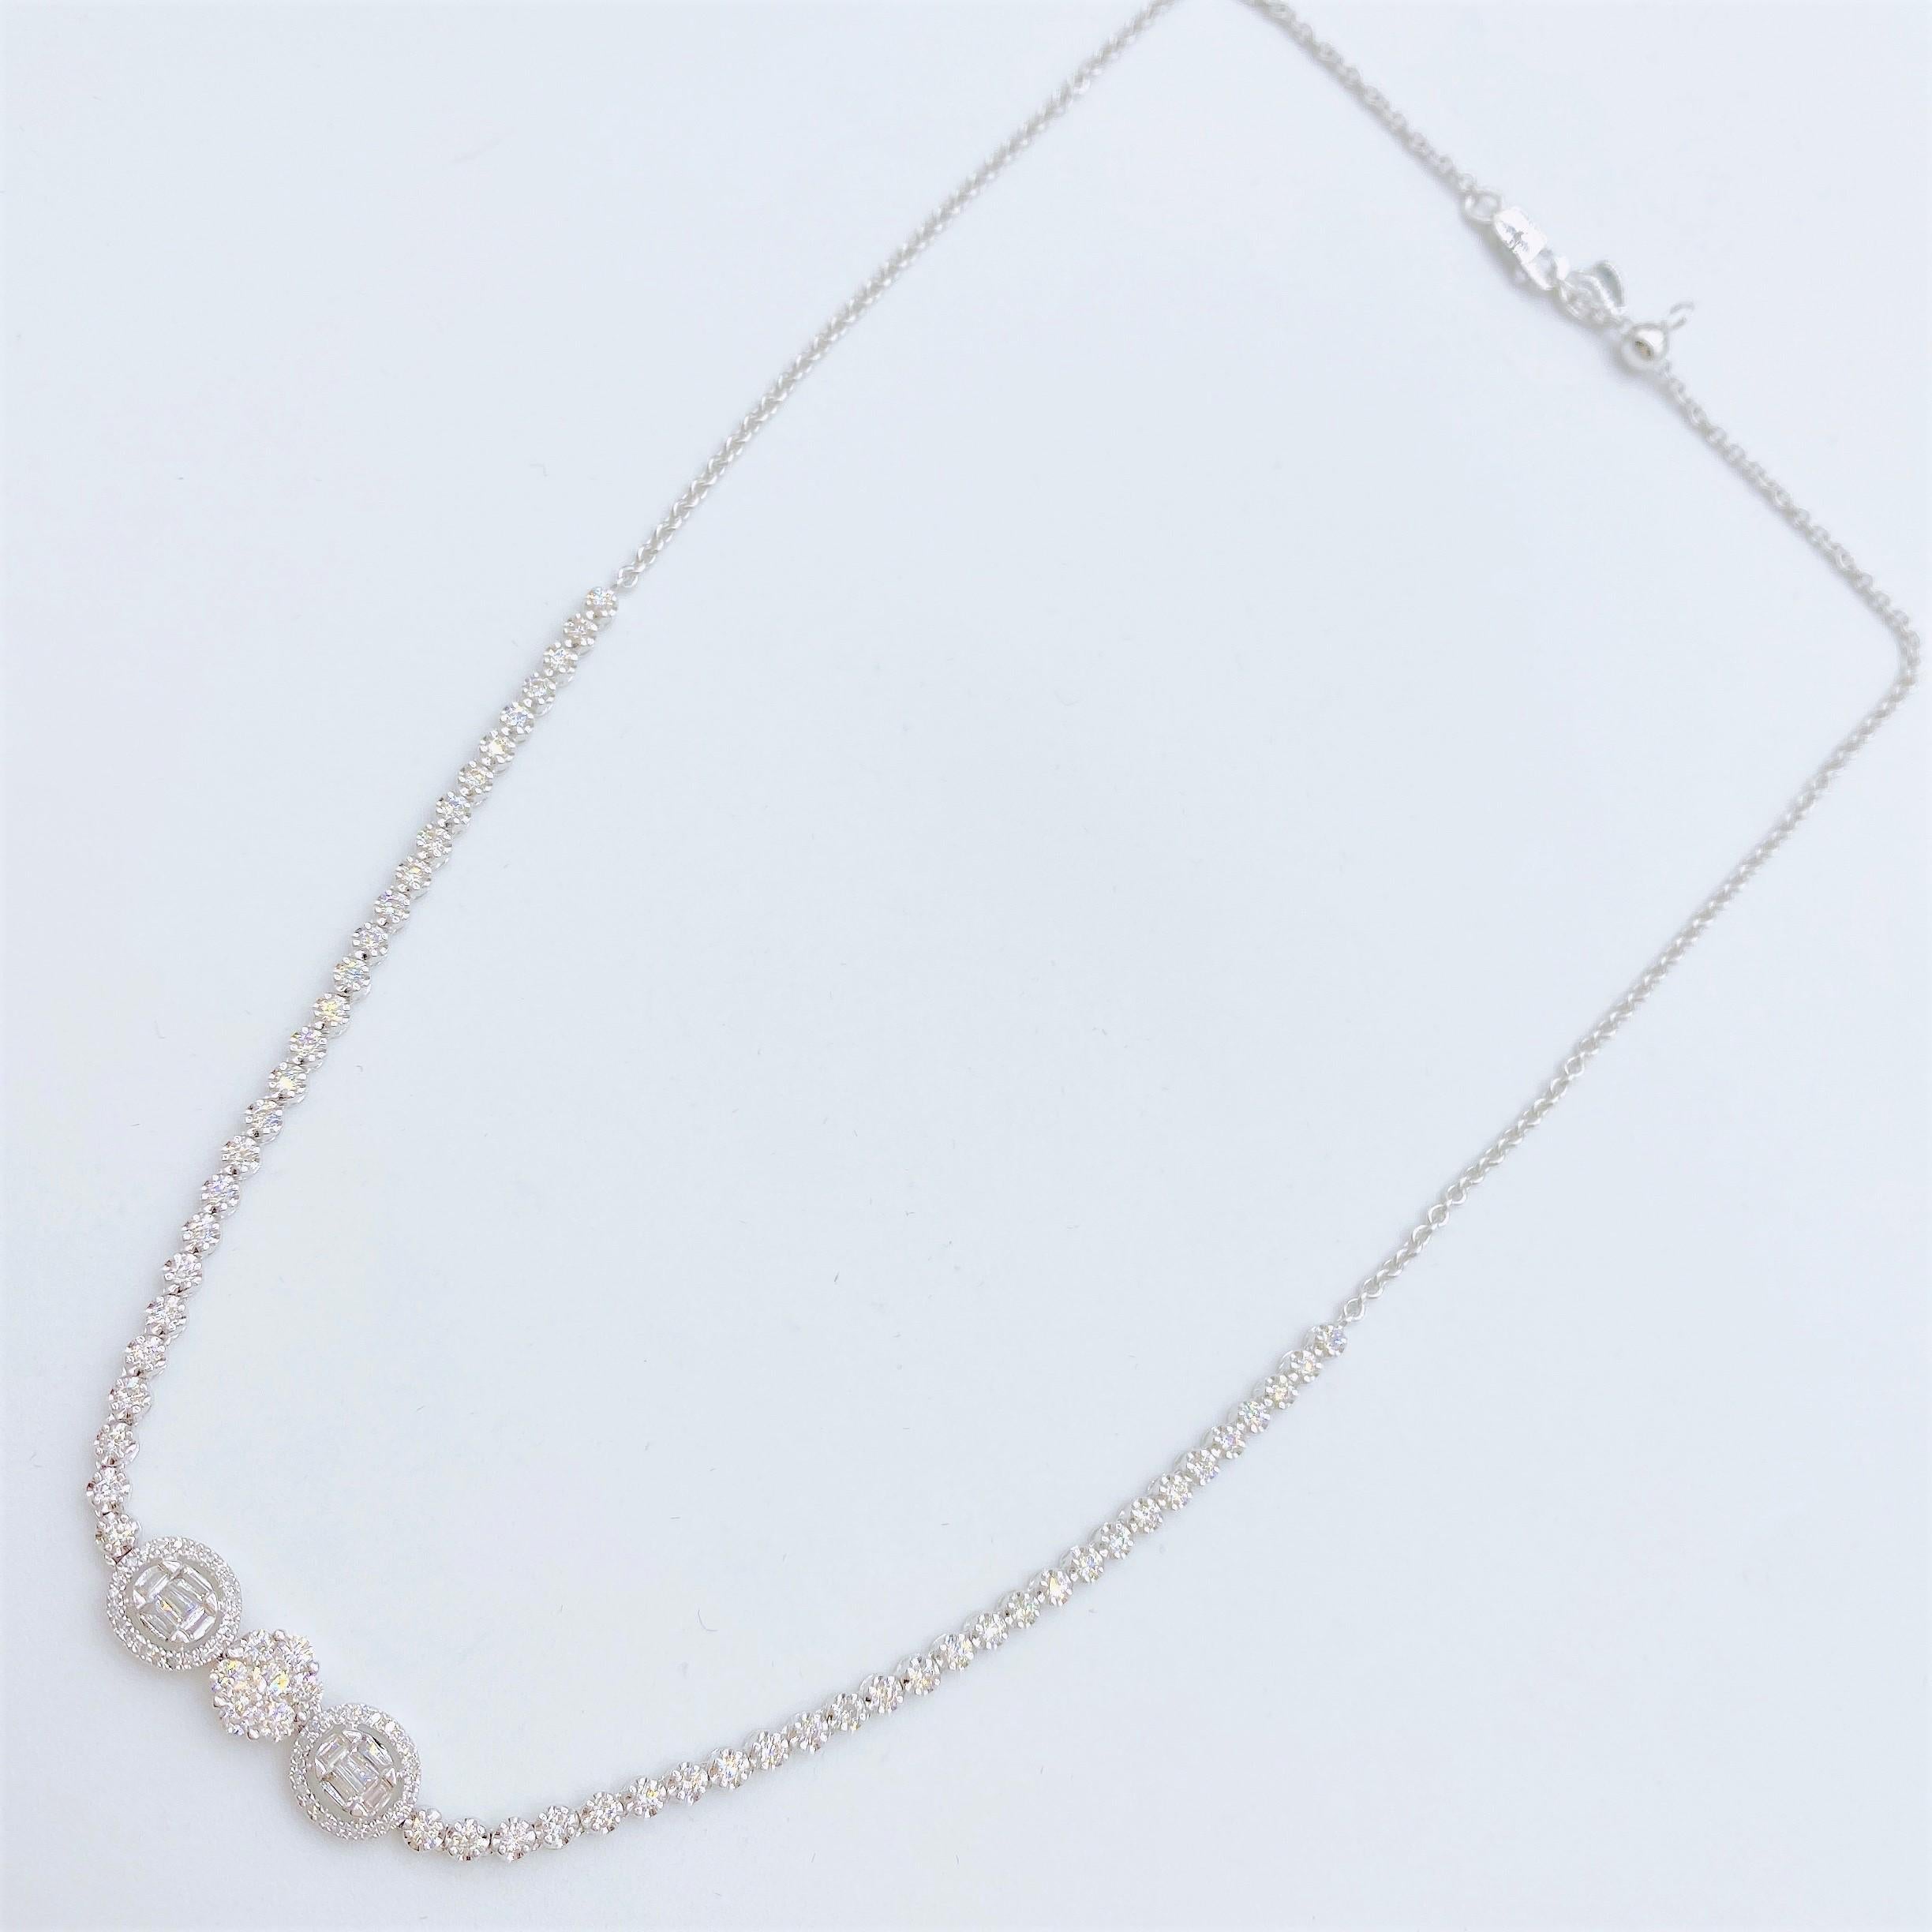 The Following Item we are offering is this Beautiful Rare Important 18KT White Gold Large Glittering Diamond Choker Necklace. Necklace is comprised of approx 1.50CTS Magnificent Rare Gorgeous Fancy Glittering Diamonds!!! The Diamonds are of